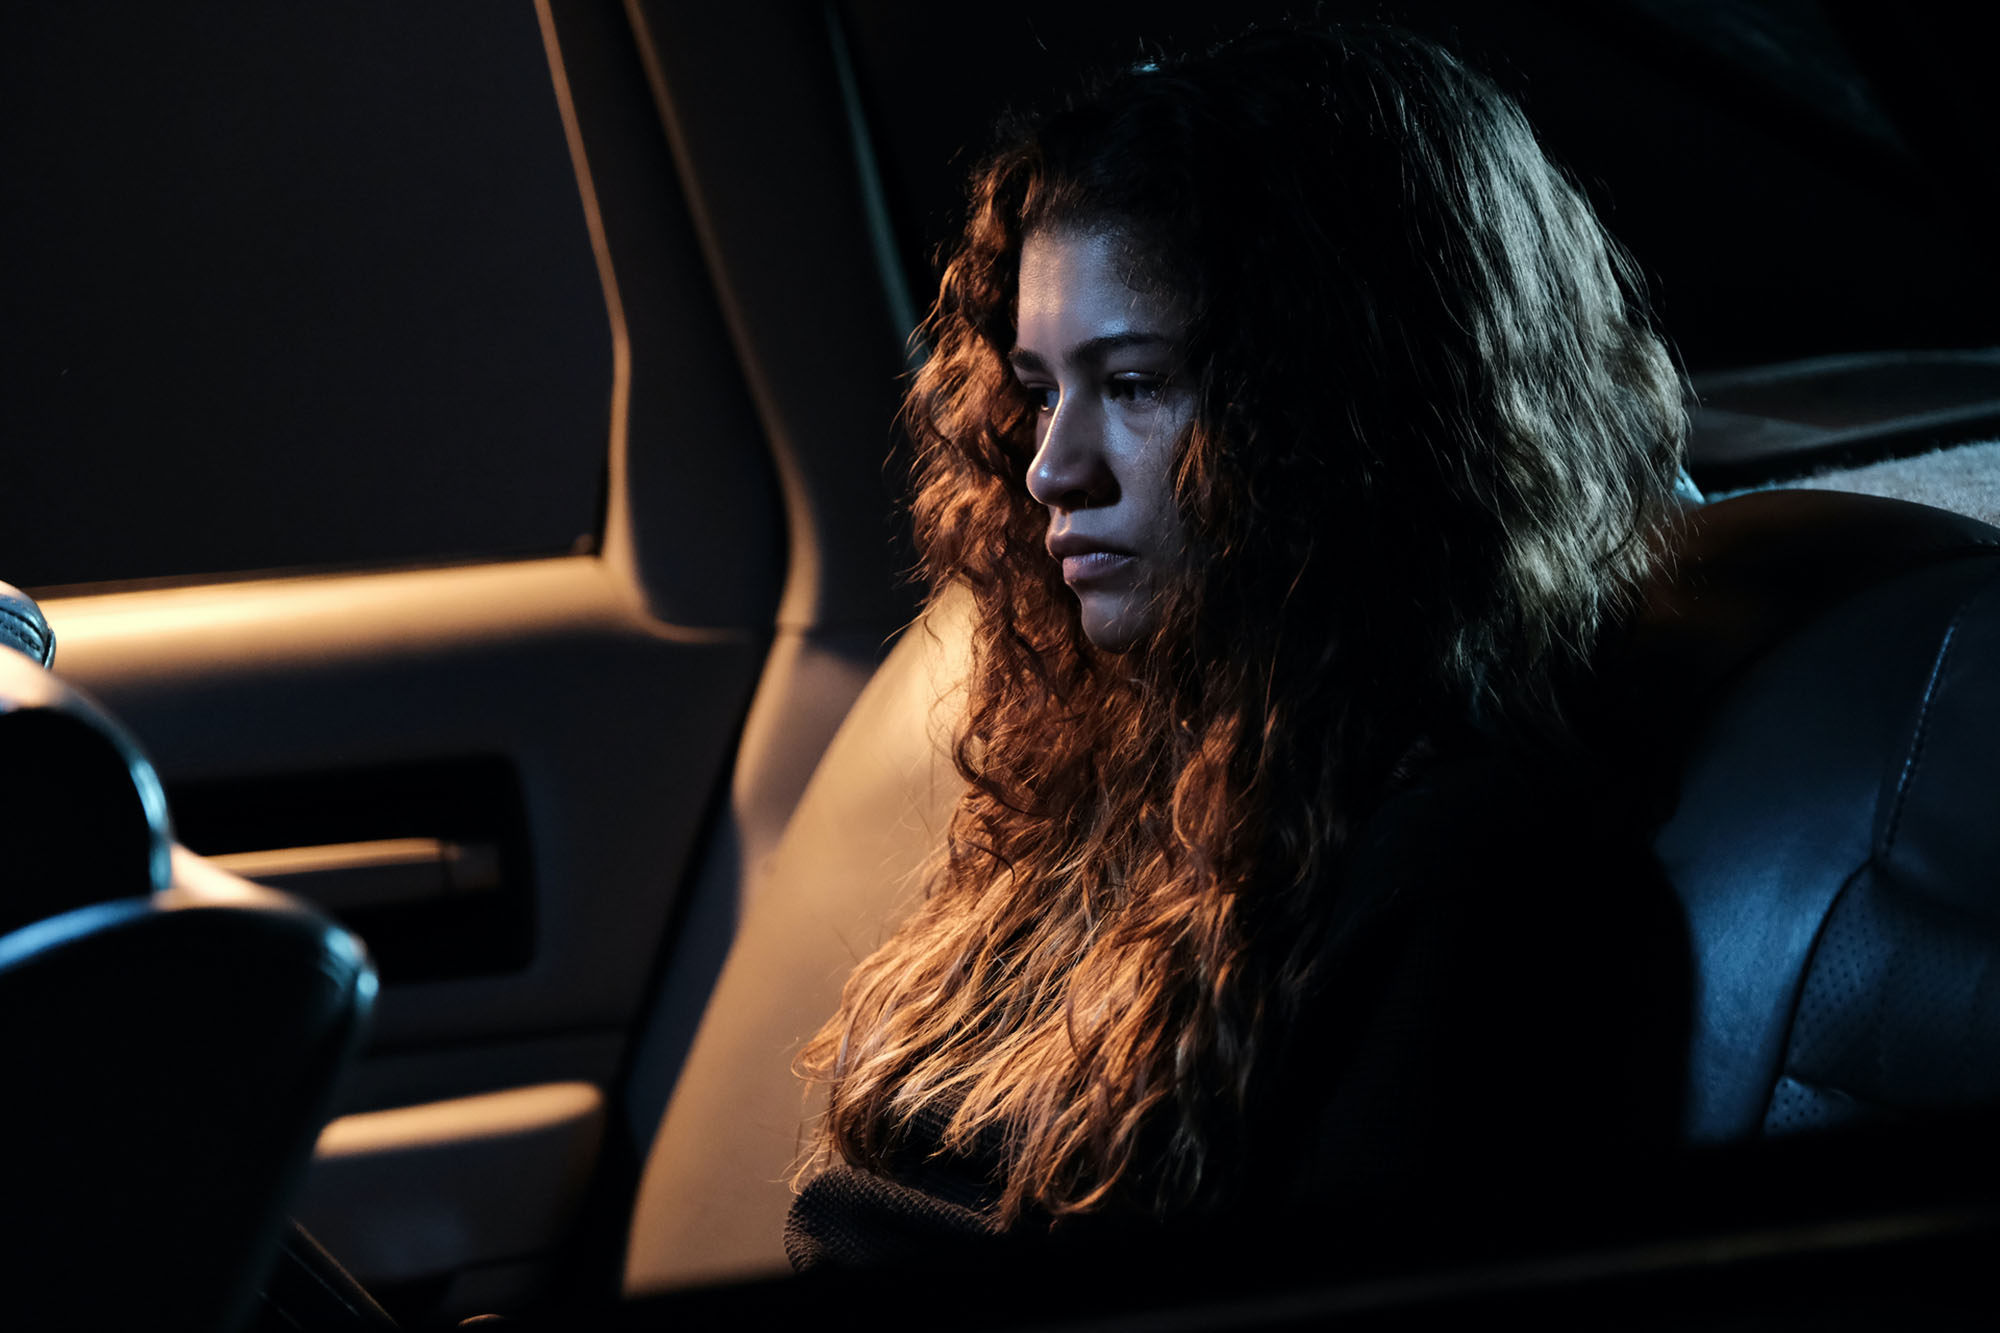 Zendaya as Rue in the second season of “Euphoria”. From casting to plot to changes behind the scenes, what do we know about the third season of the HBO show? Photo: TNS